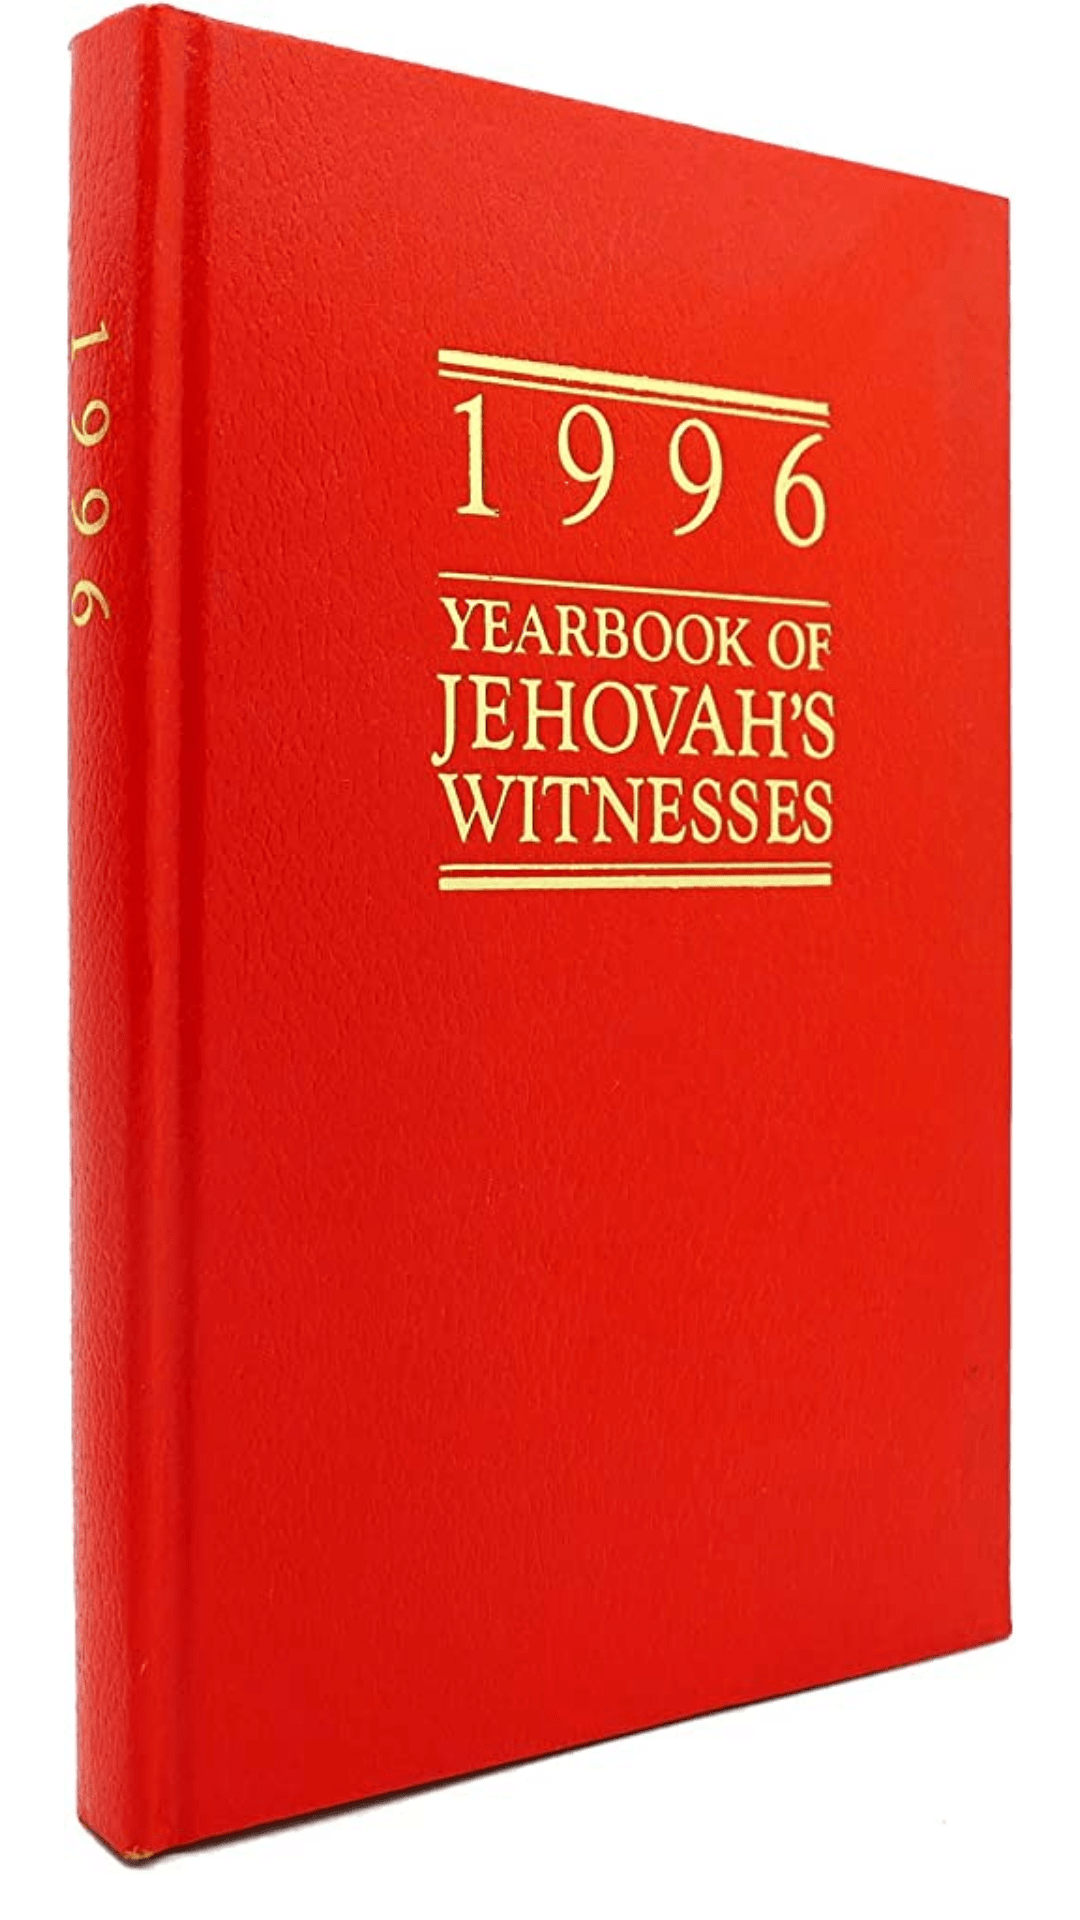 1996 Yearbook of the Jehovah's Witnesses